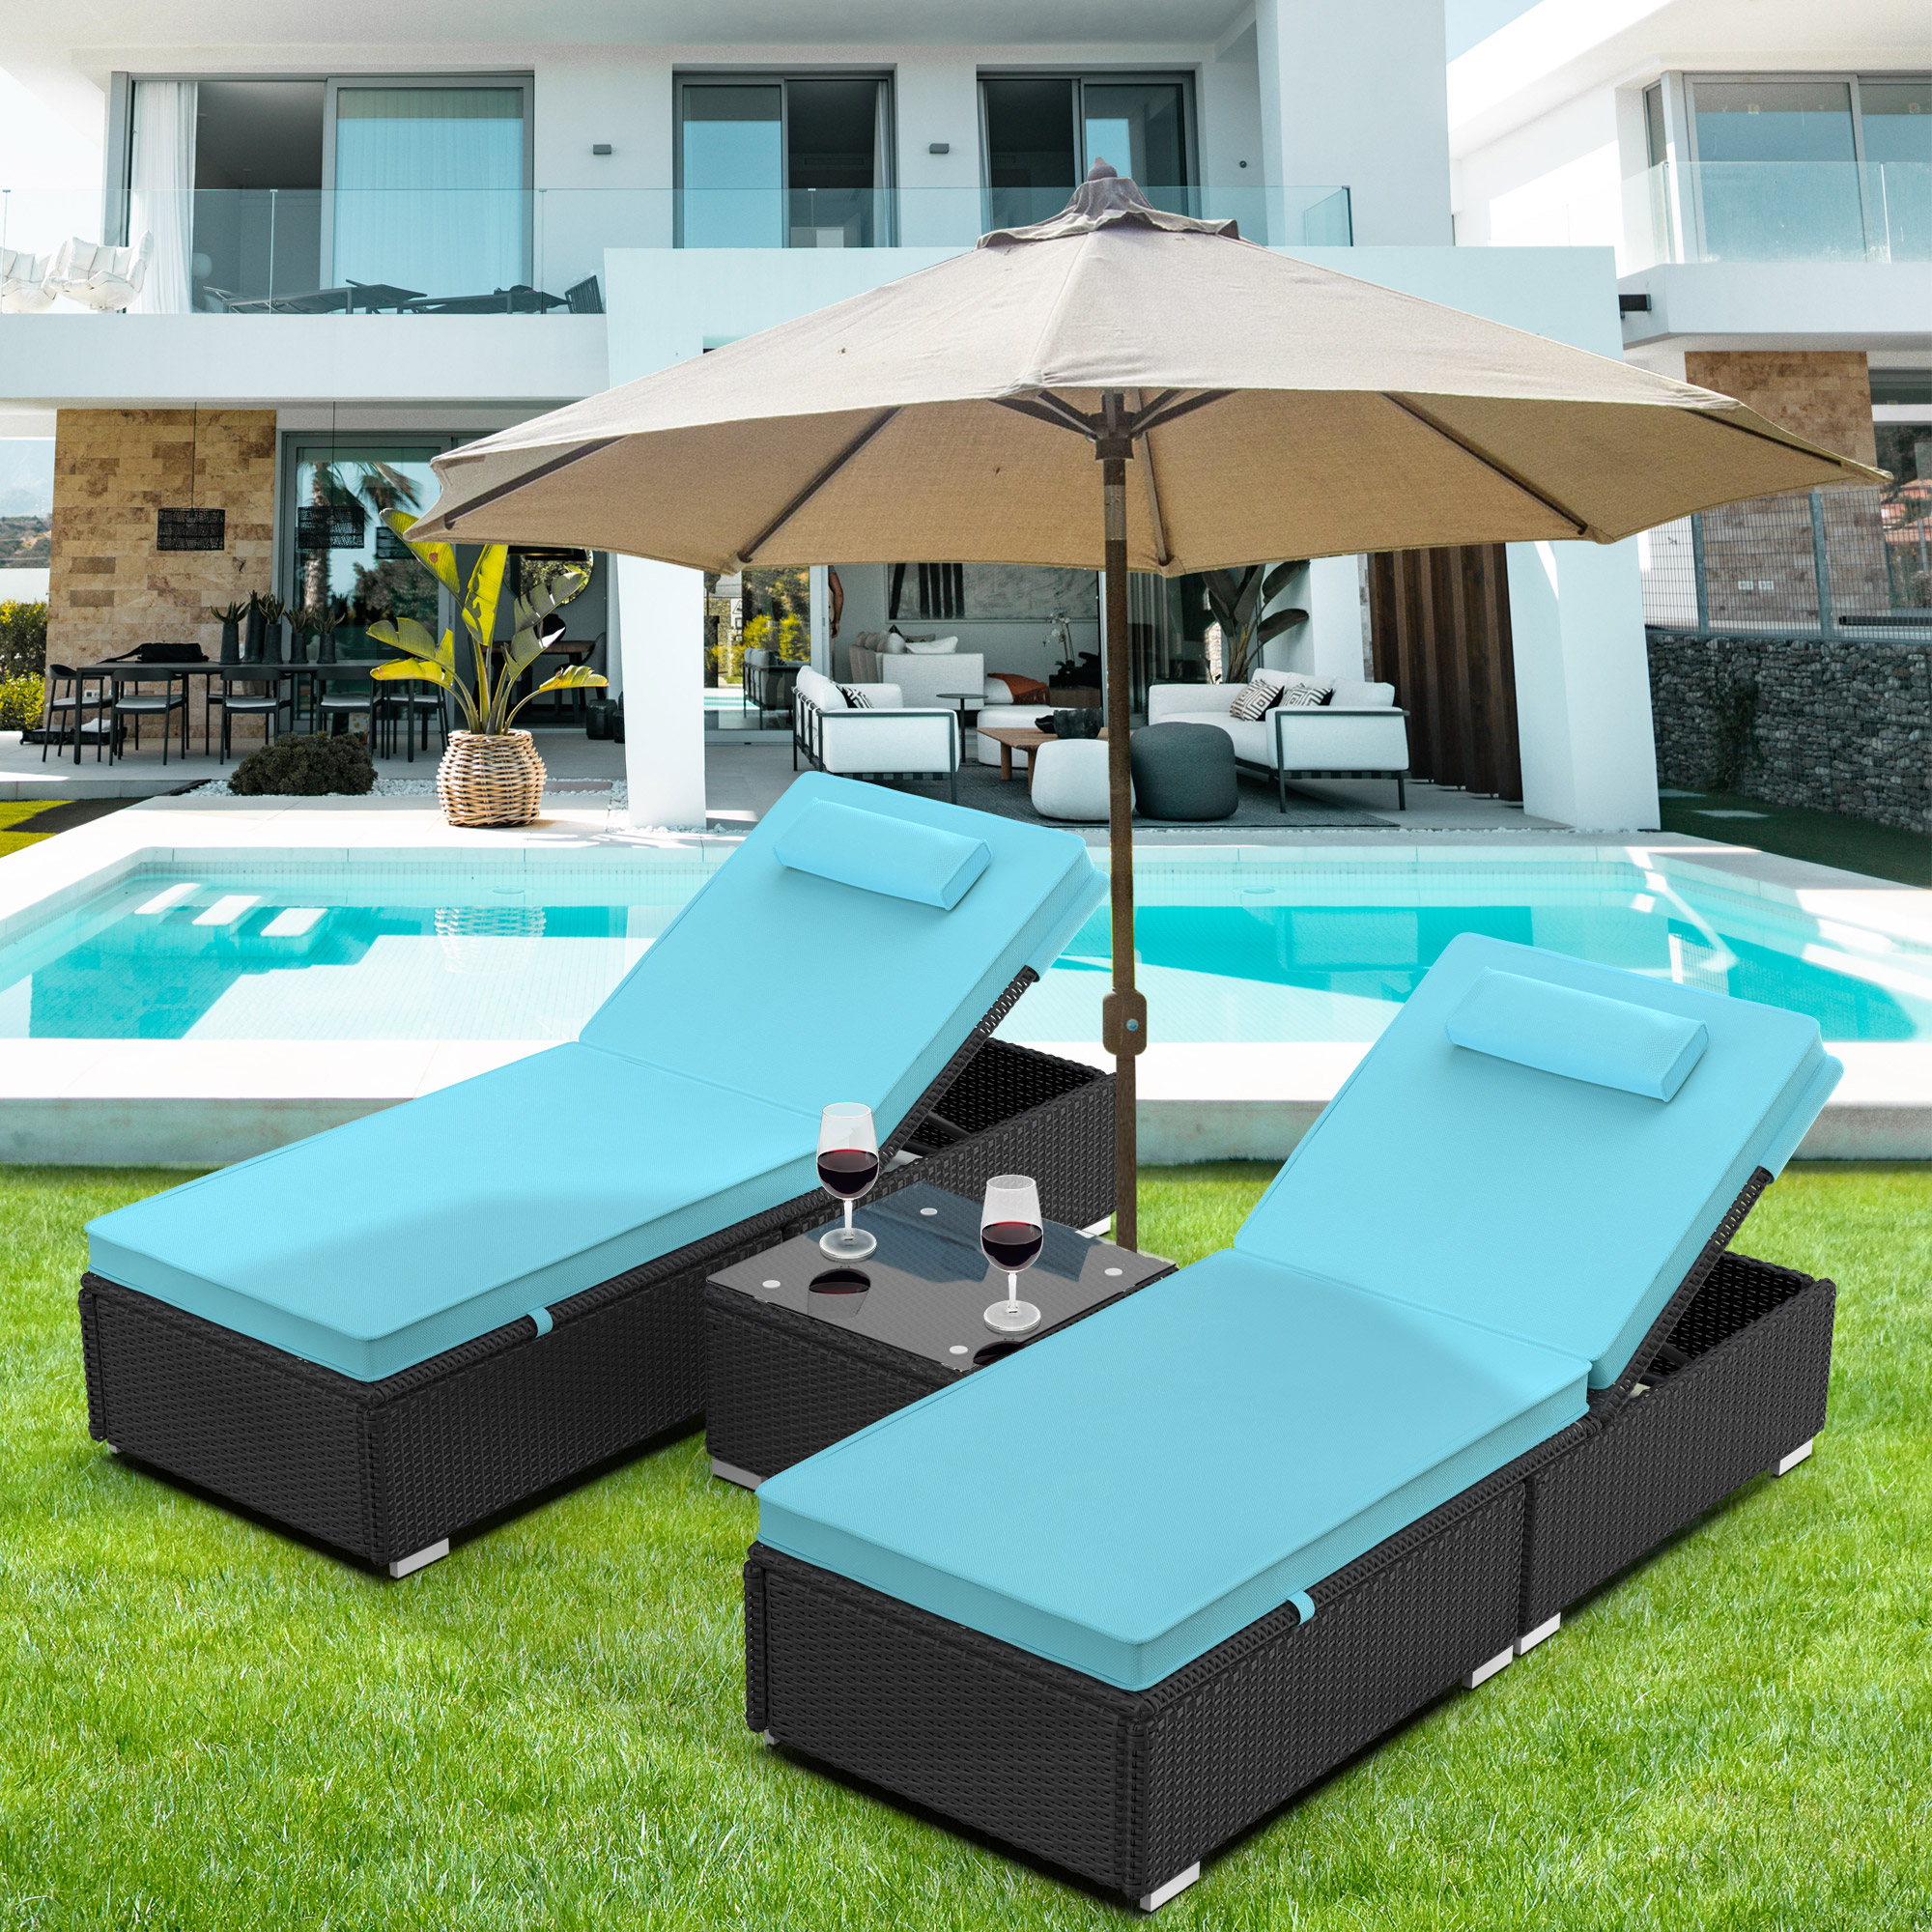 3 Pieces 5 Position Outdoor PE Rattan Patio Lounge Set, Folding Reclining Chaise Chairs with 2 Pillows & Coffee Table, Wicker Chaise Furniture Sets for Porch Poolside Backyard Garden, S1546 - image 1 of 12